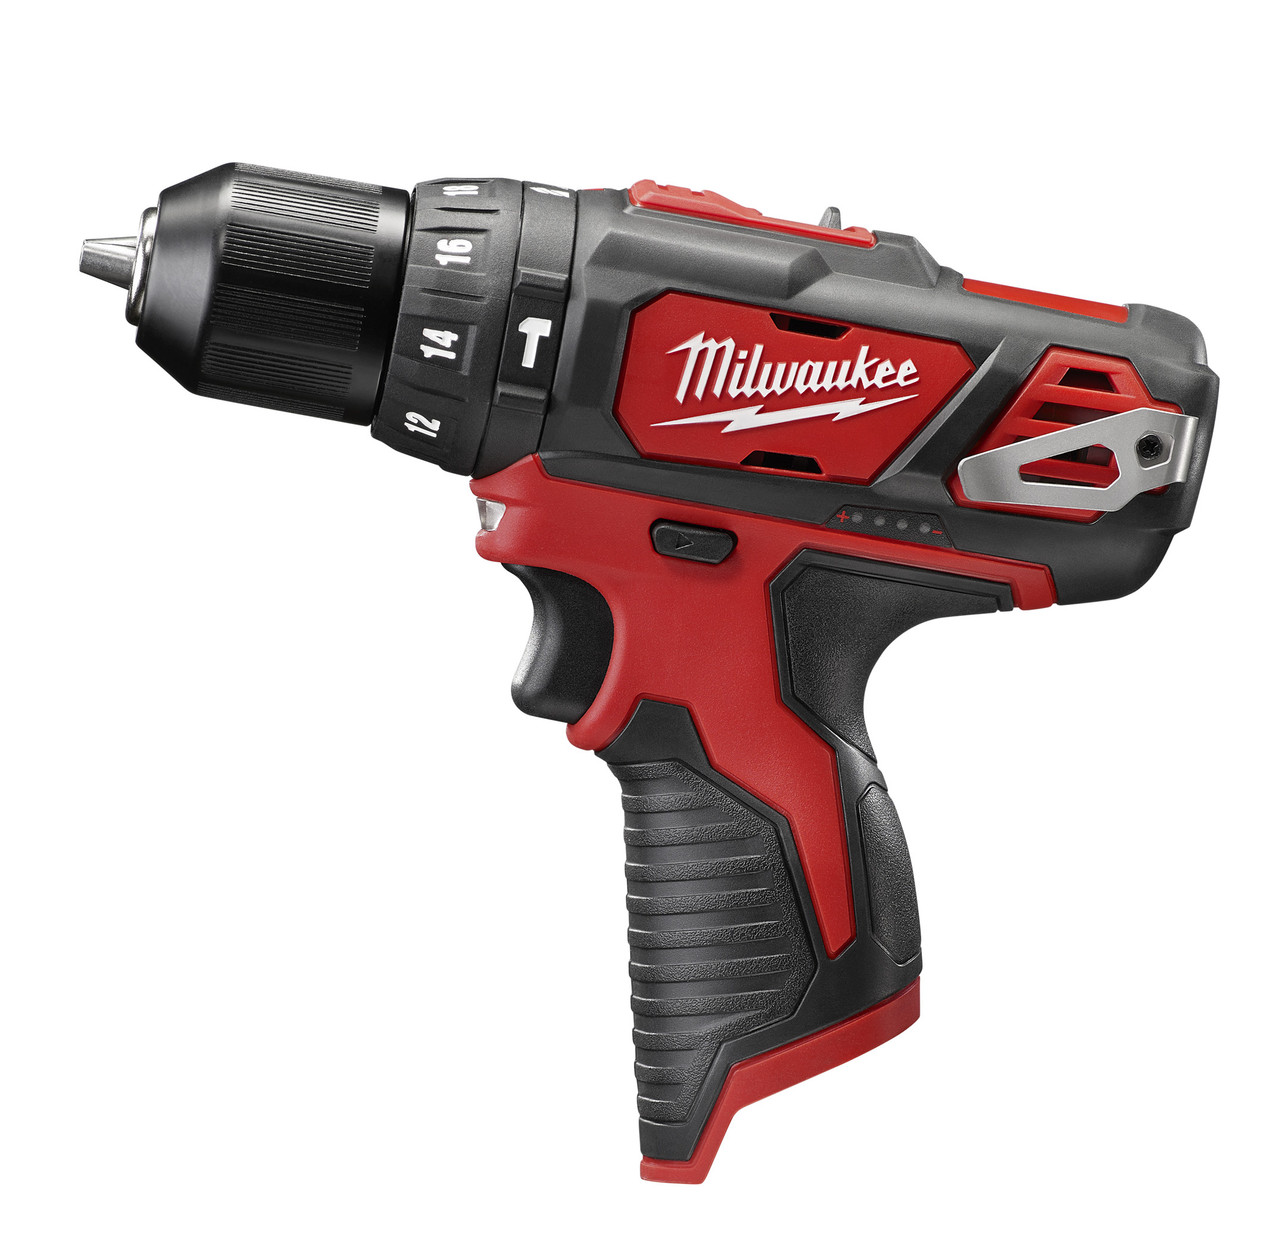 Milwaukee 2408-20 - M12™ 3/8” Hammer Drill/Driver (Tool Only